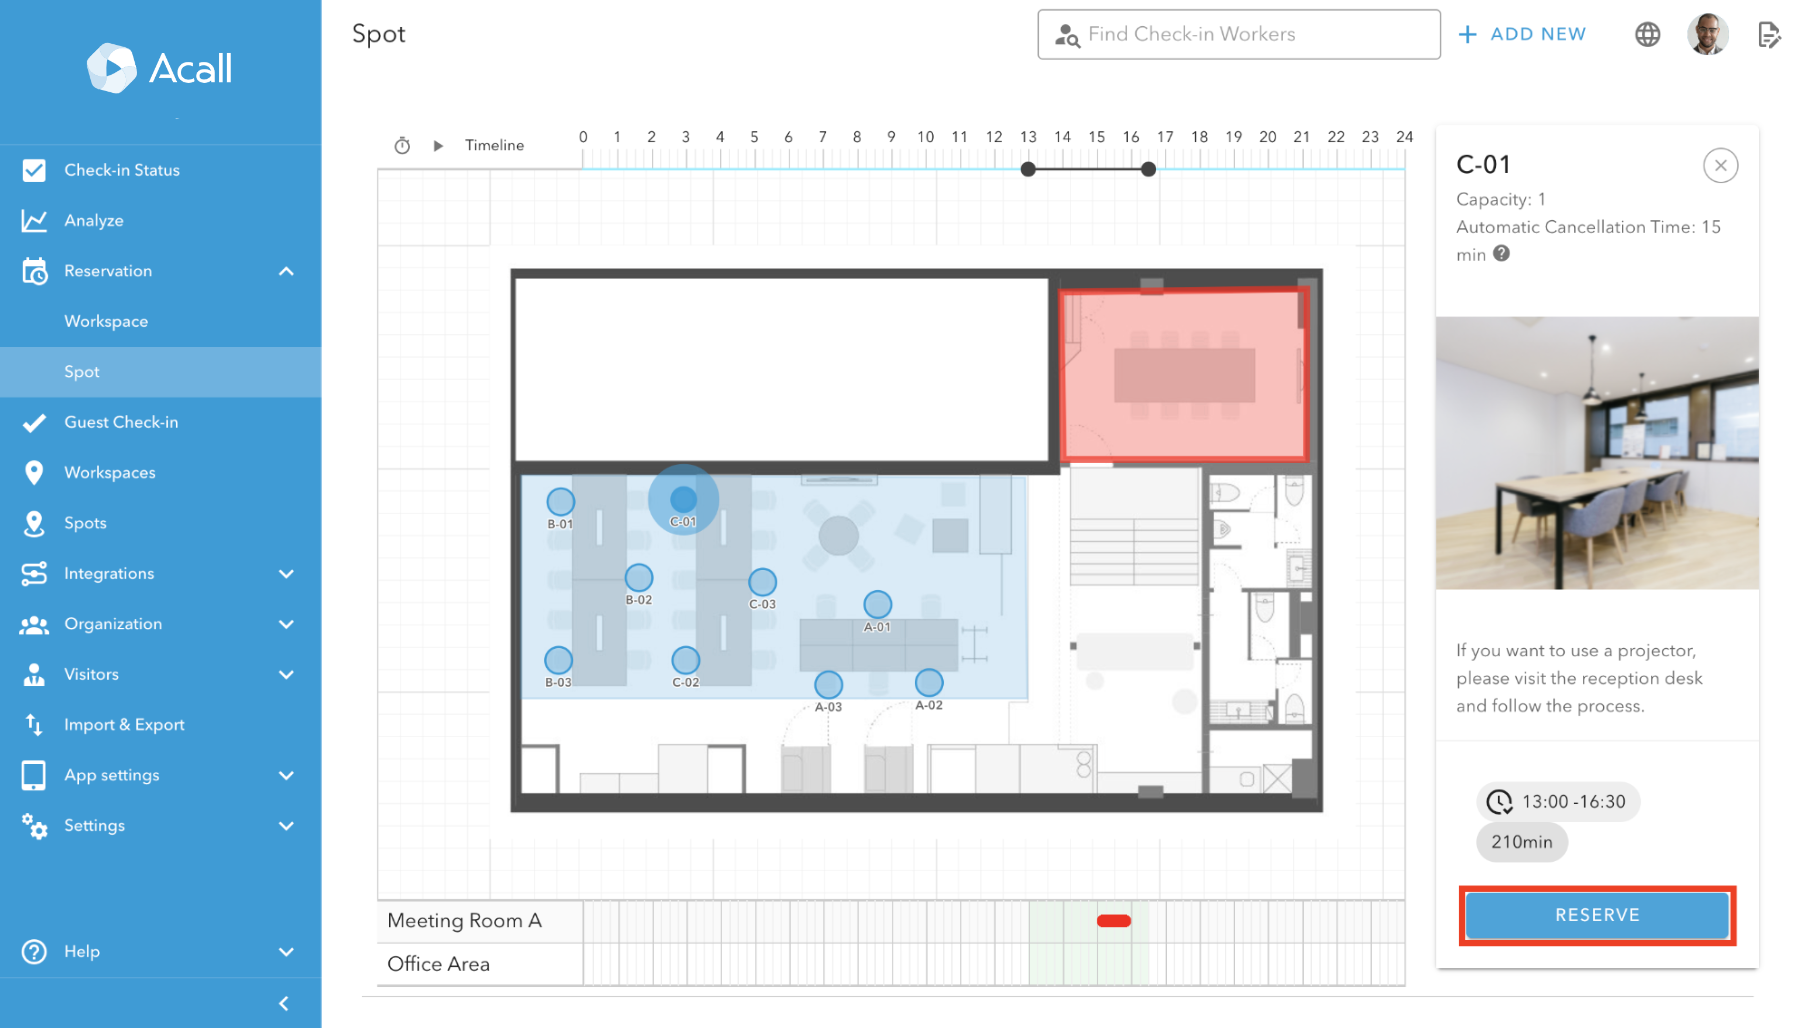 Reserve Your Spot on Floor Map on Acall Portal8.png